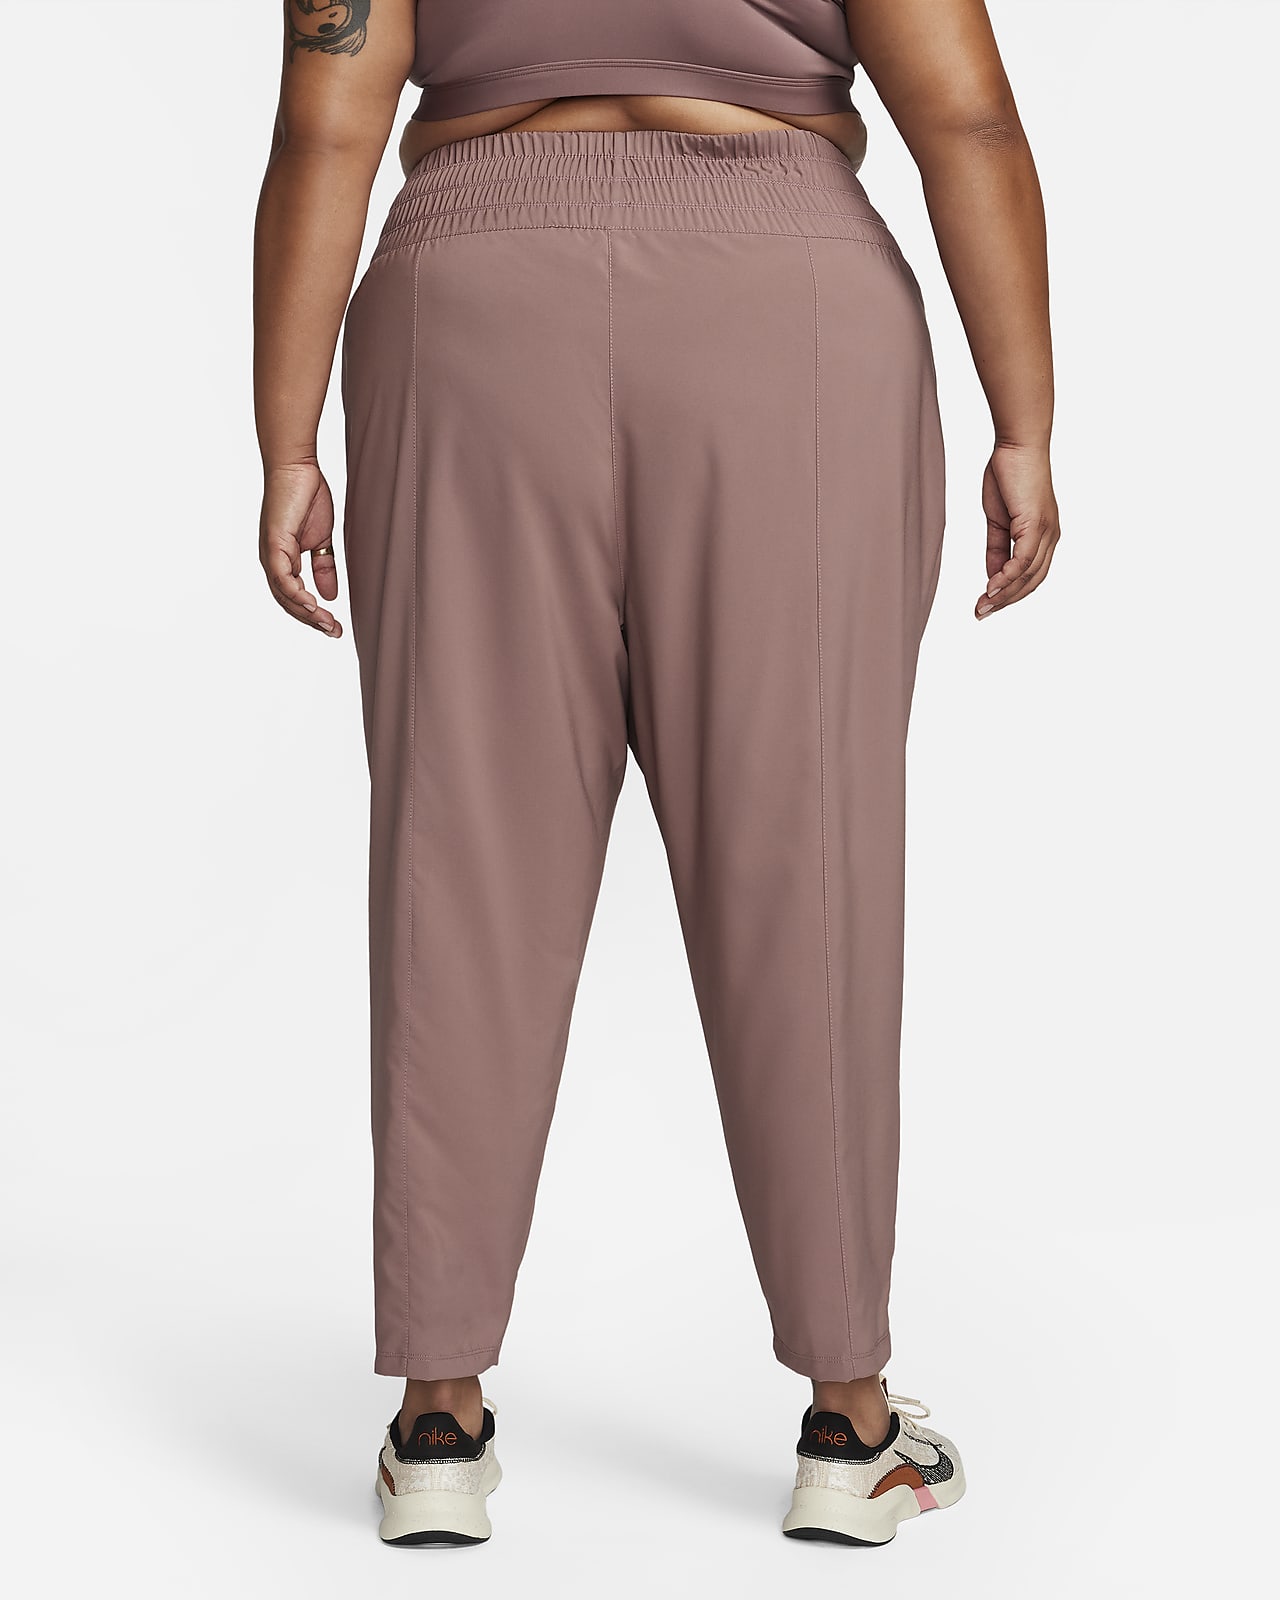 Nike Dri-FIT One Women's Ultra High-Waisted Trousers (Plus Size)